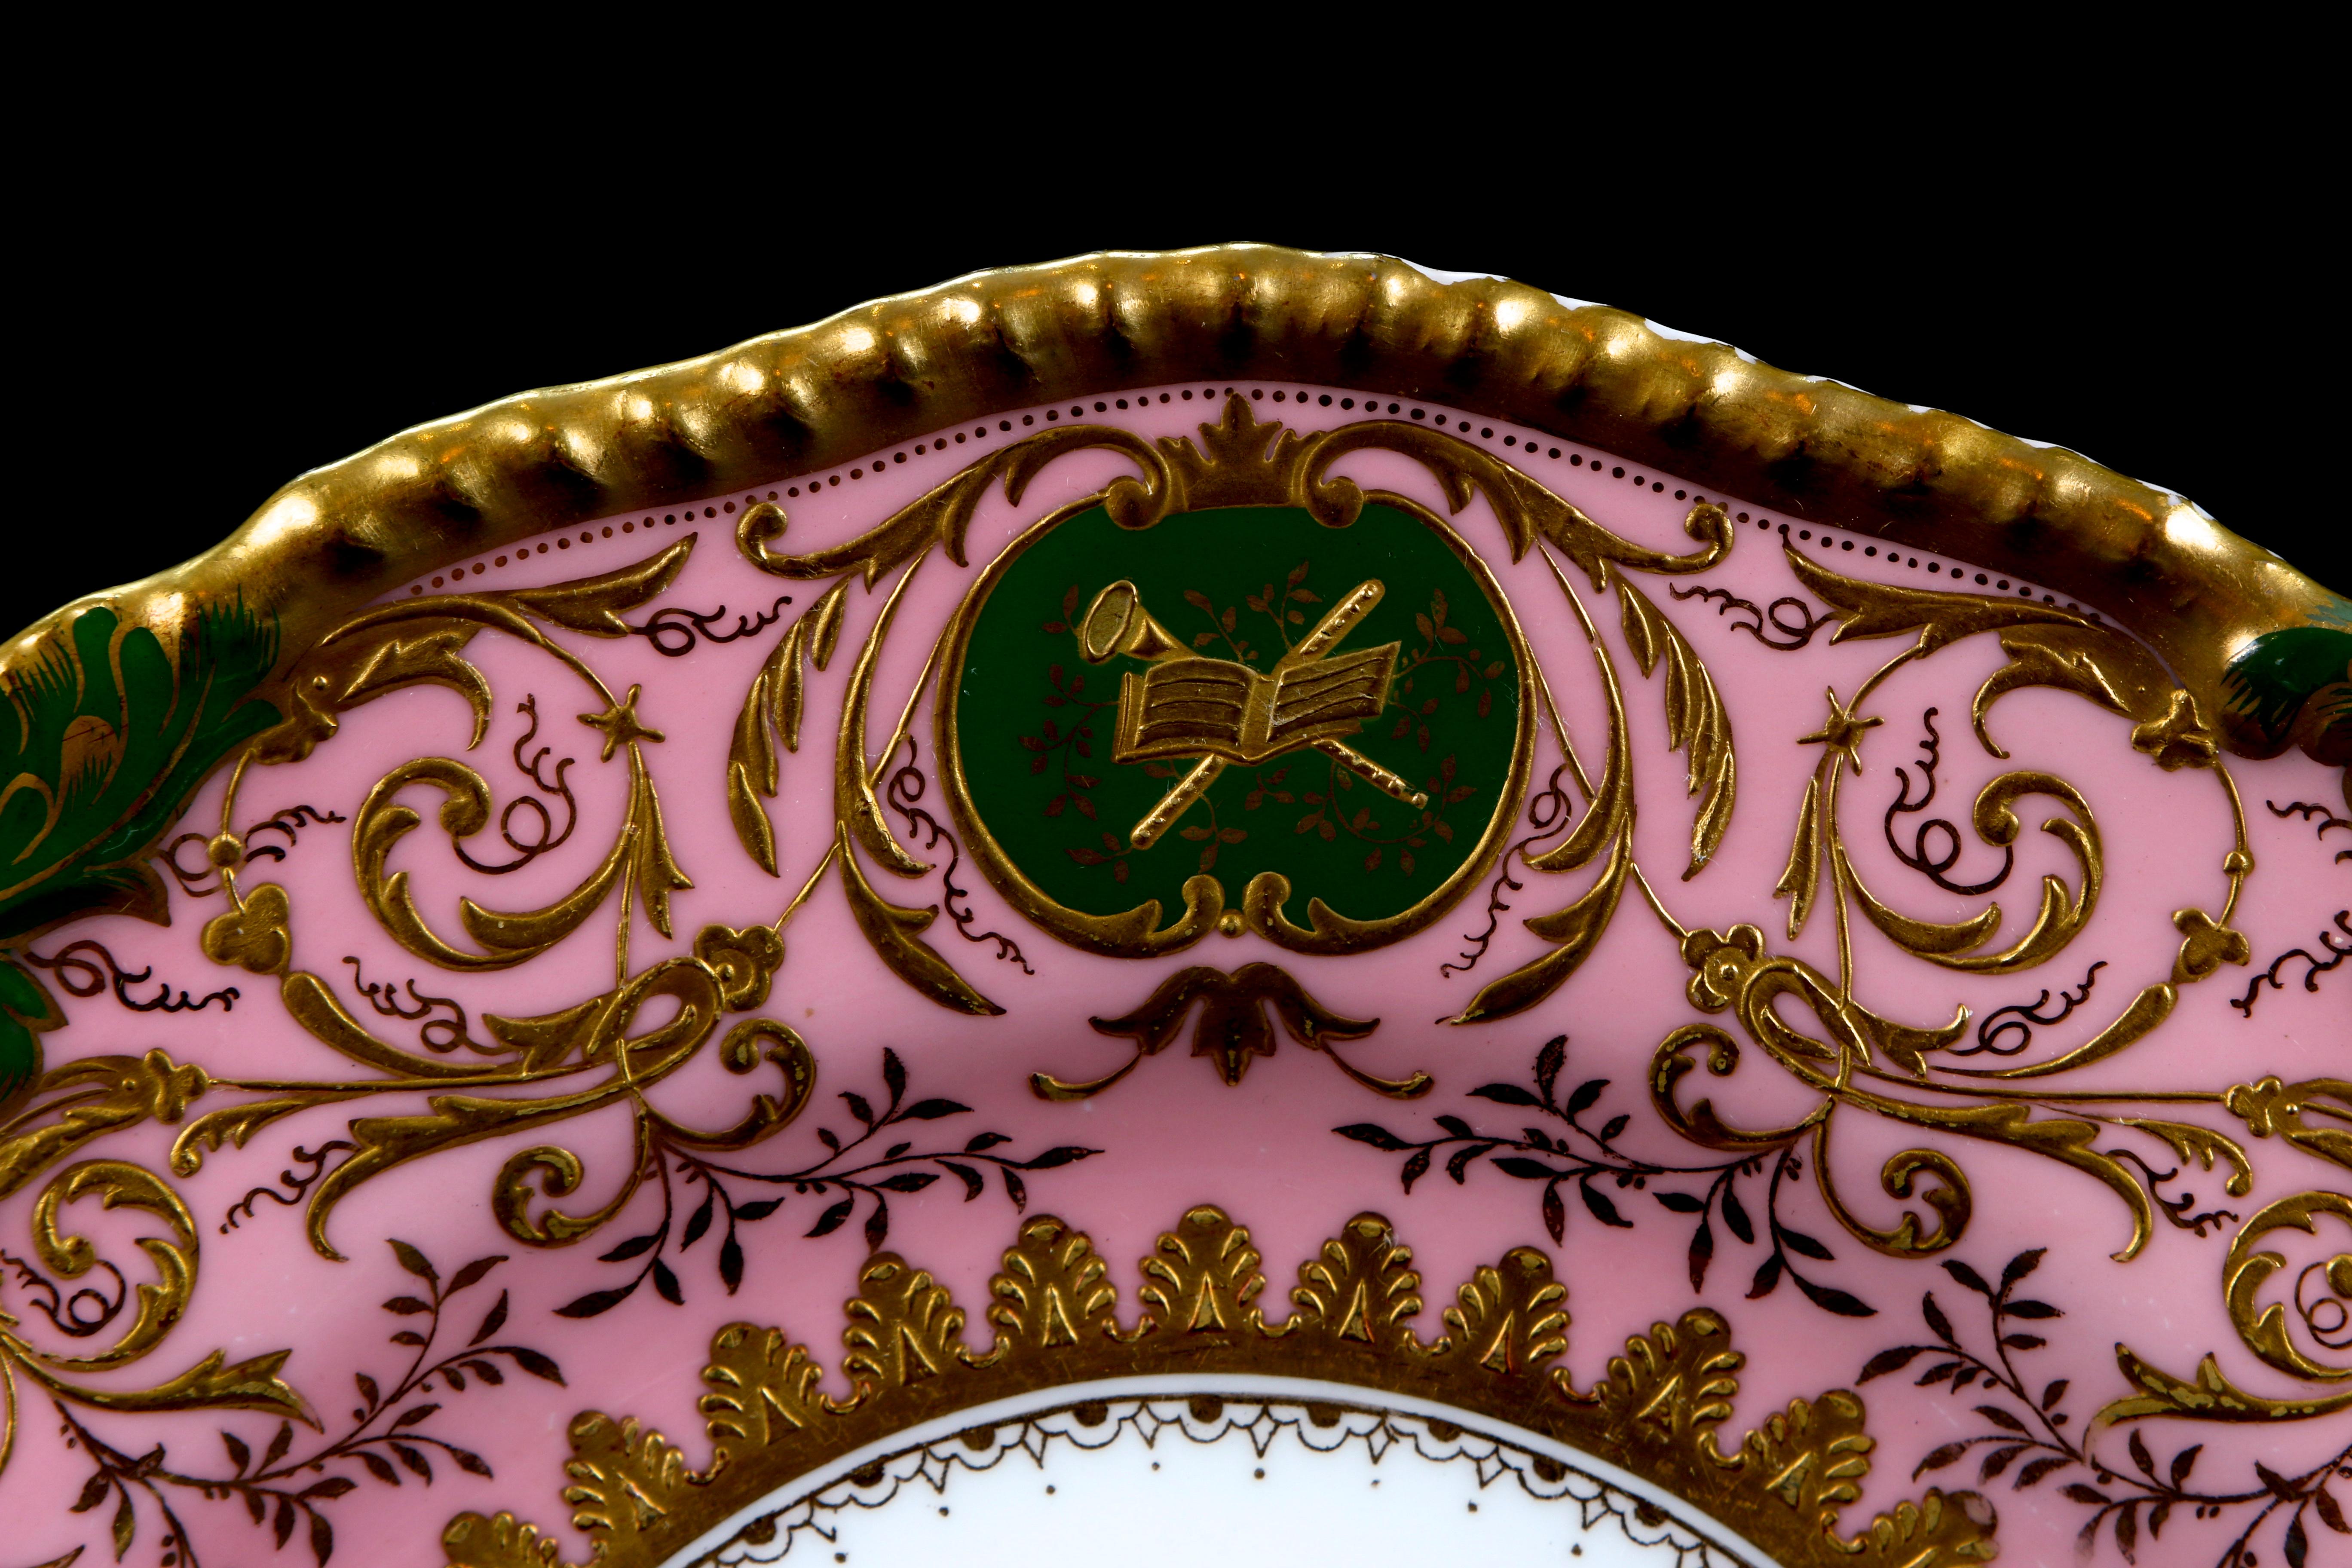 Rococo 12 Coalport Pink and Green Heavily Gilded Plates Featuring Musical Instruments